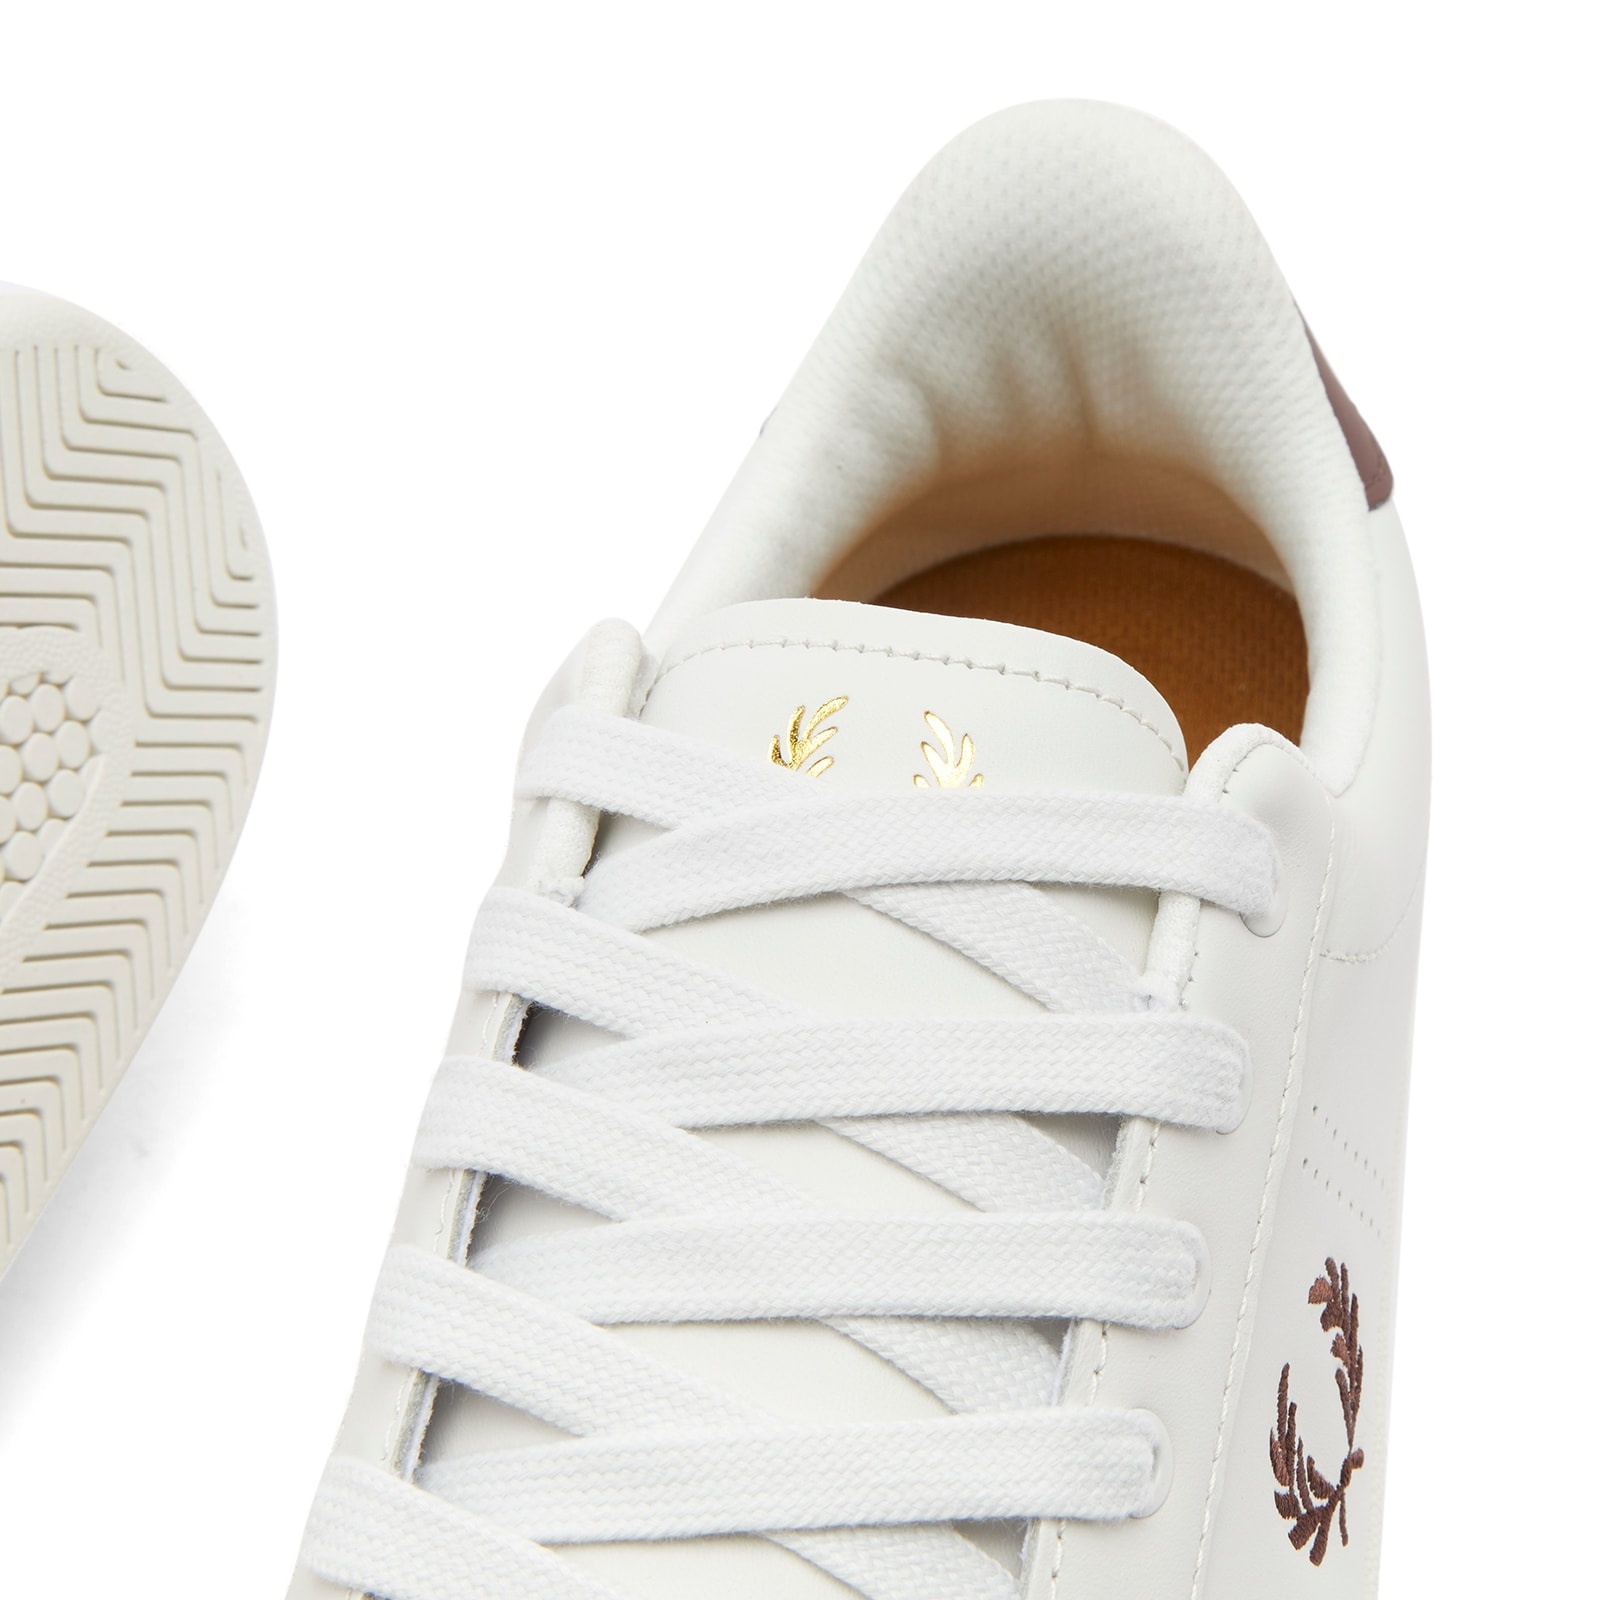 Fred Perry B721 Leather Sneaker - 4